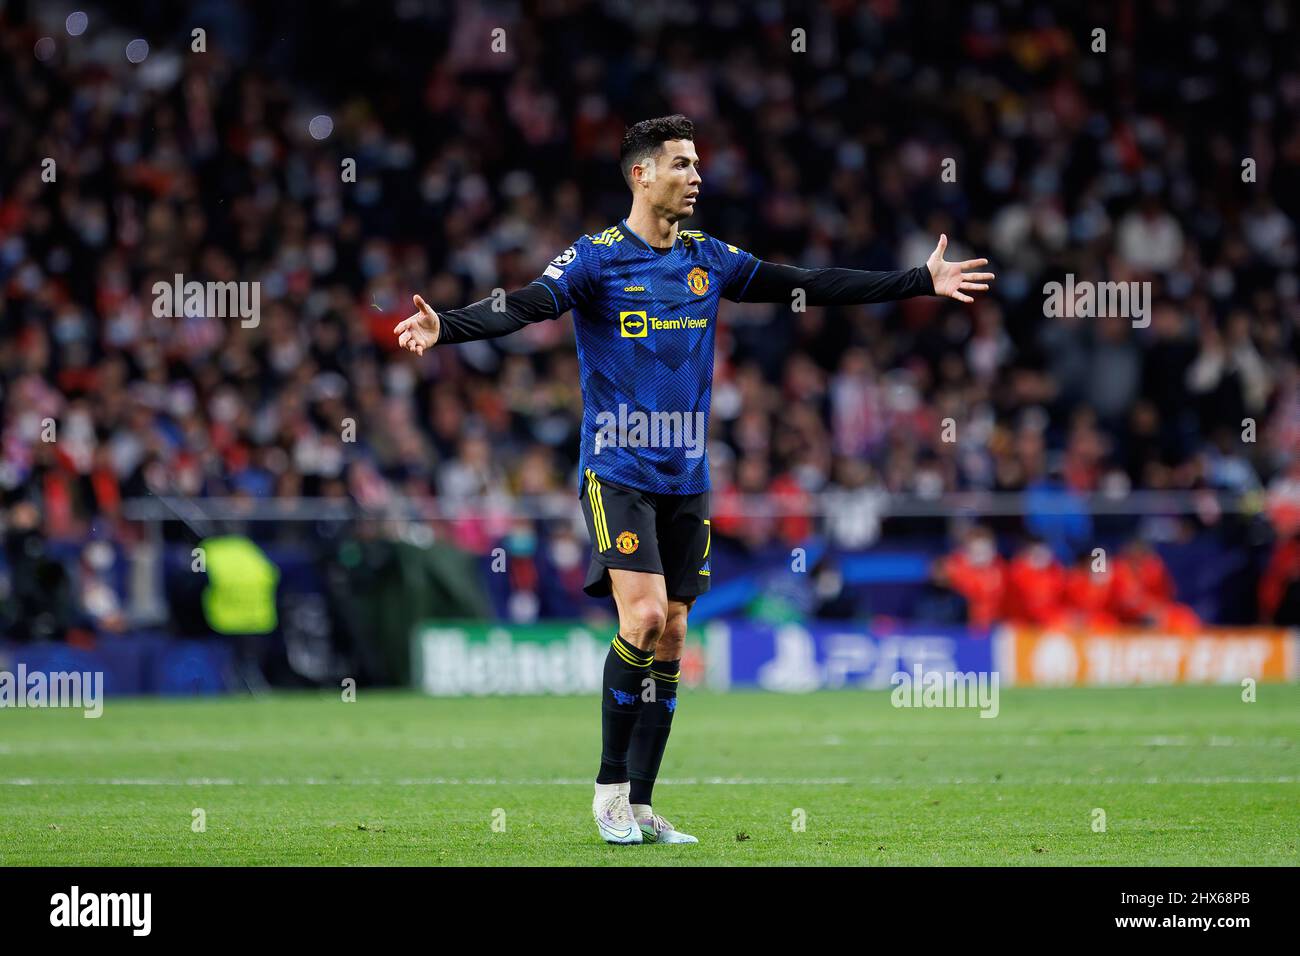 MADRID - FEB 23: Cristiano Ronaldo in action at the Champions League match between Club Atletico de Madrid and Manchester United at the Metropolitano Stock Photo